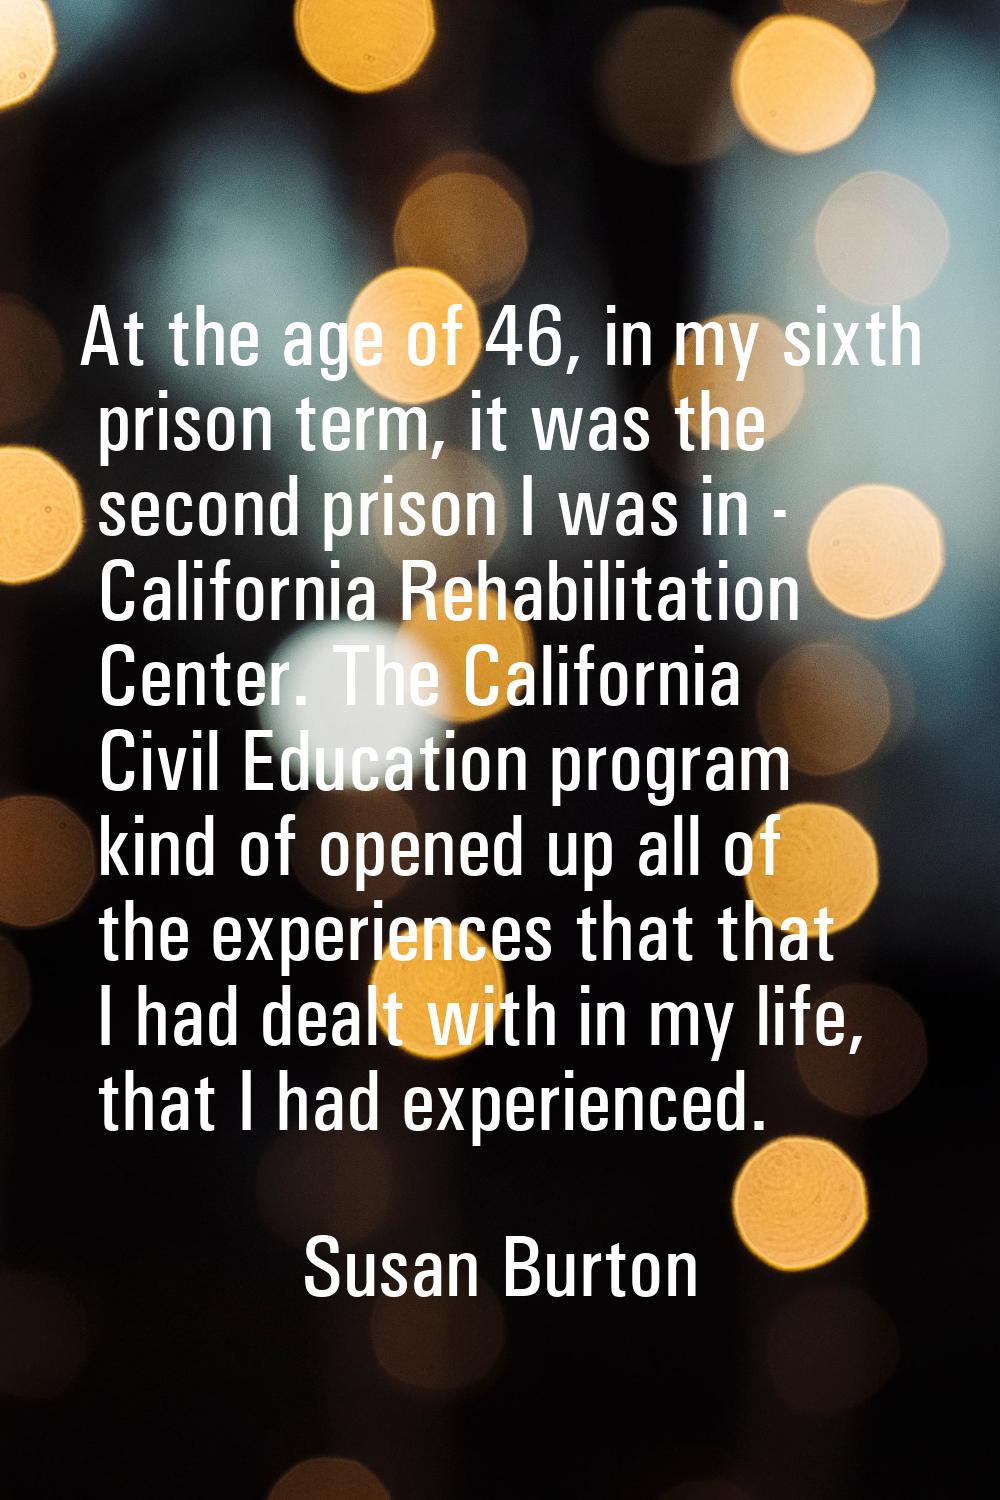 At the age of 46, in my sixth prison term, it was the second prison I was in - California Rehabilit